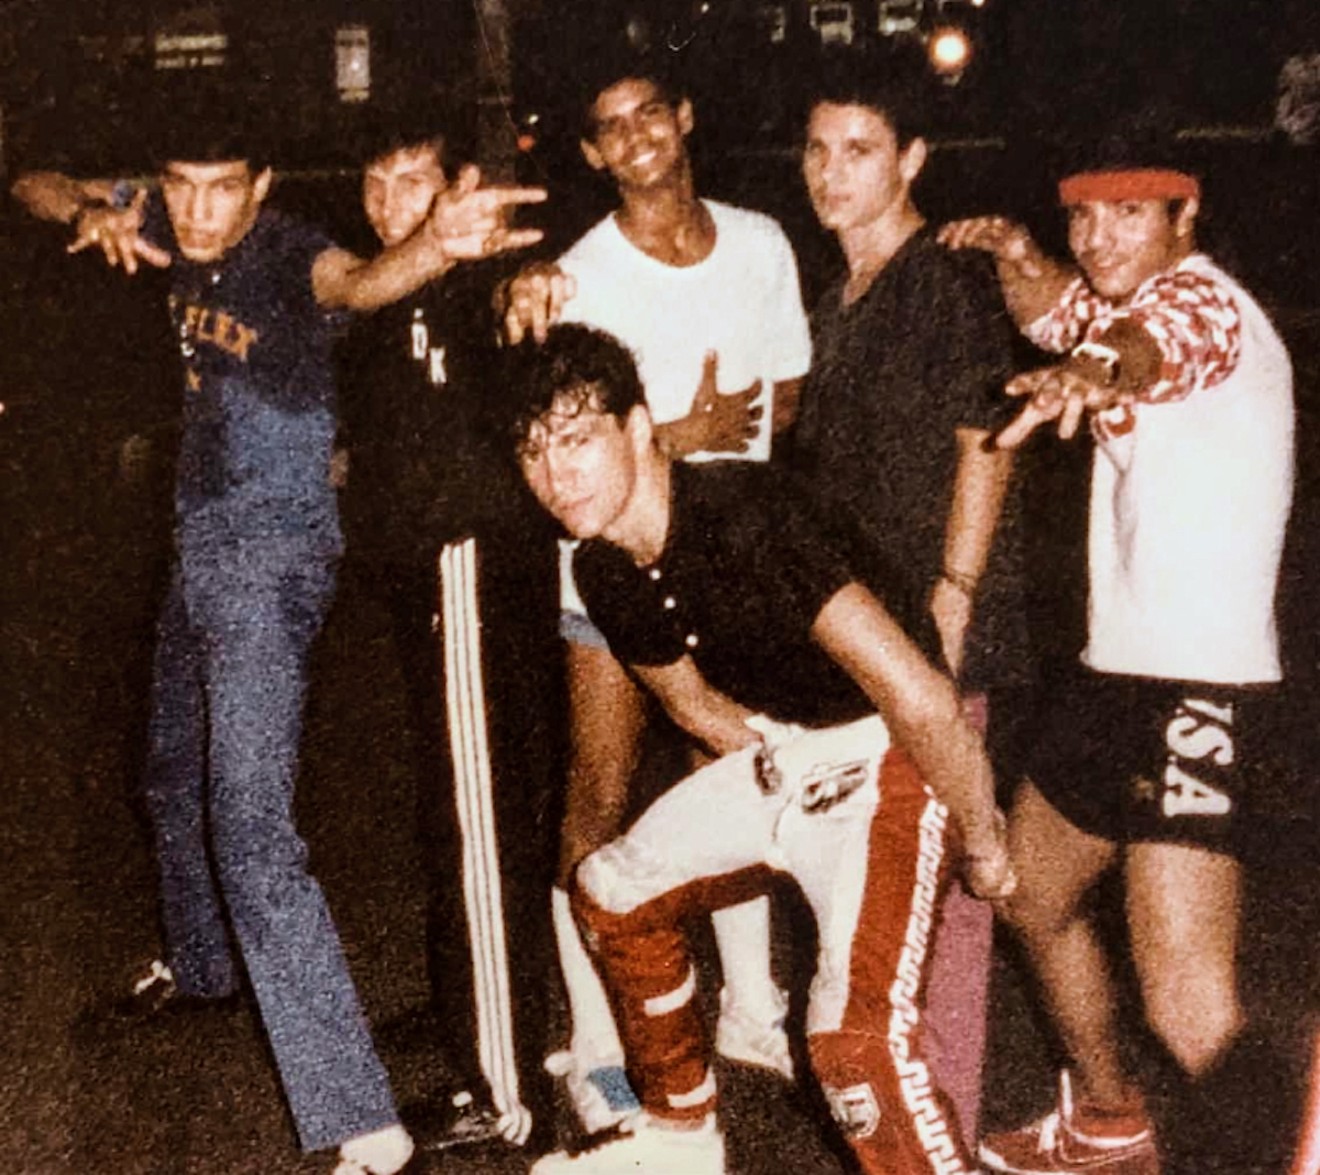 TDK Crew, one of the first breaking crews in Miami, was founded by Speedy Legs (front).